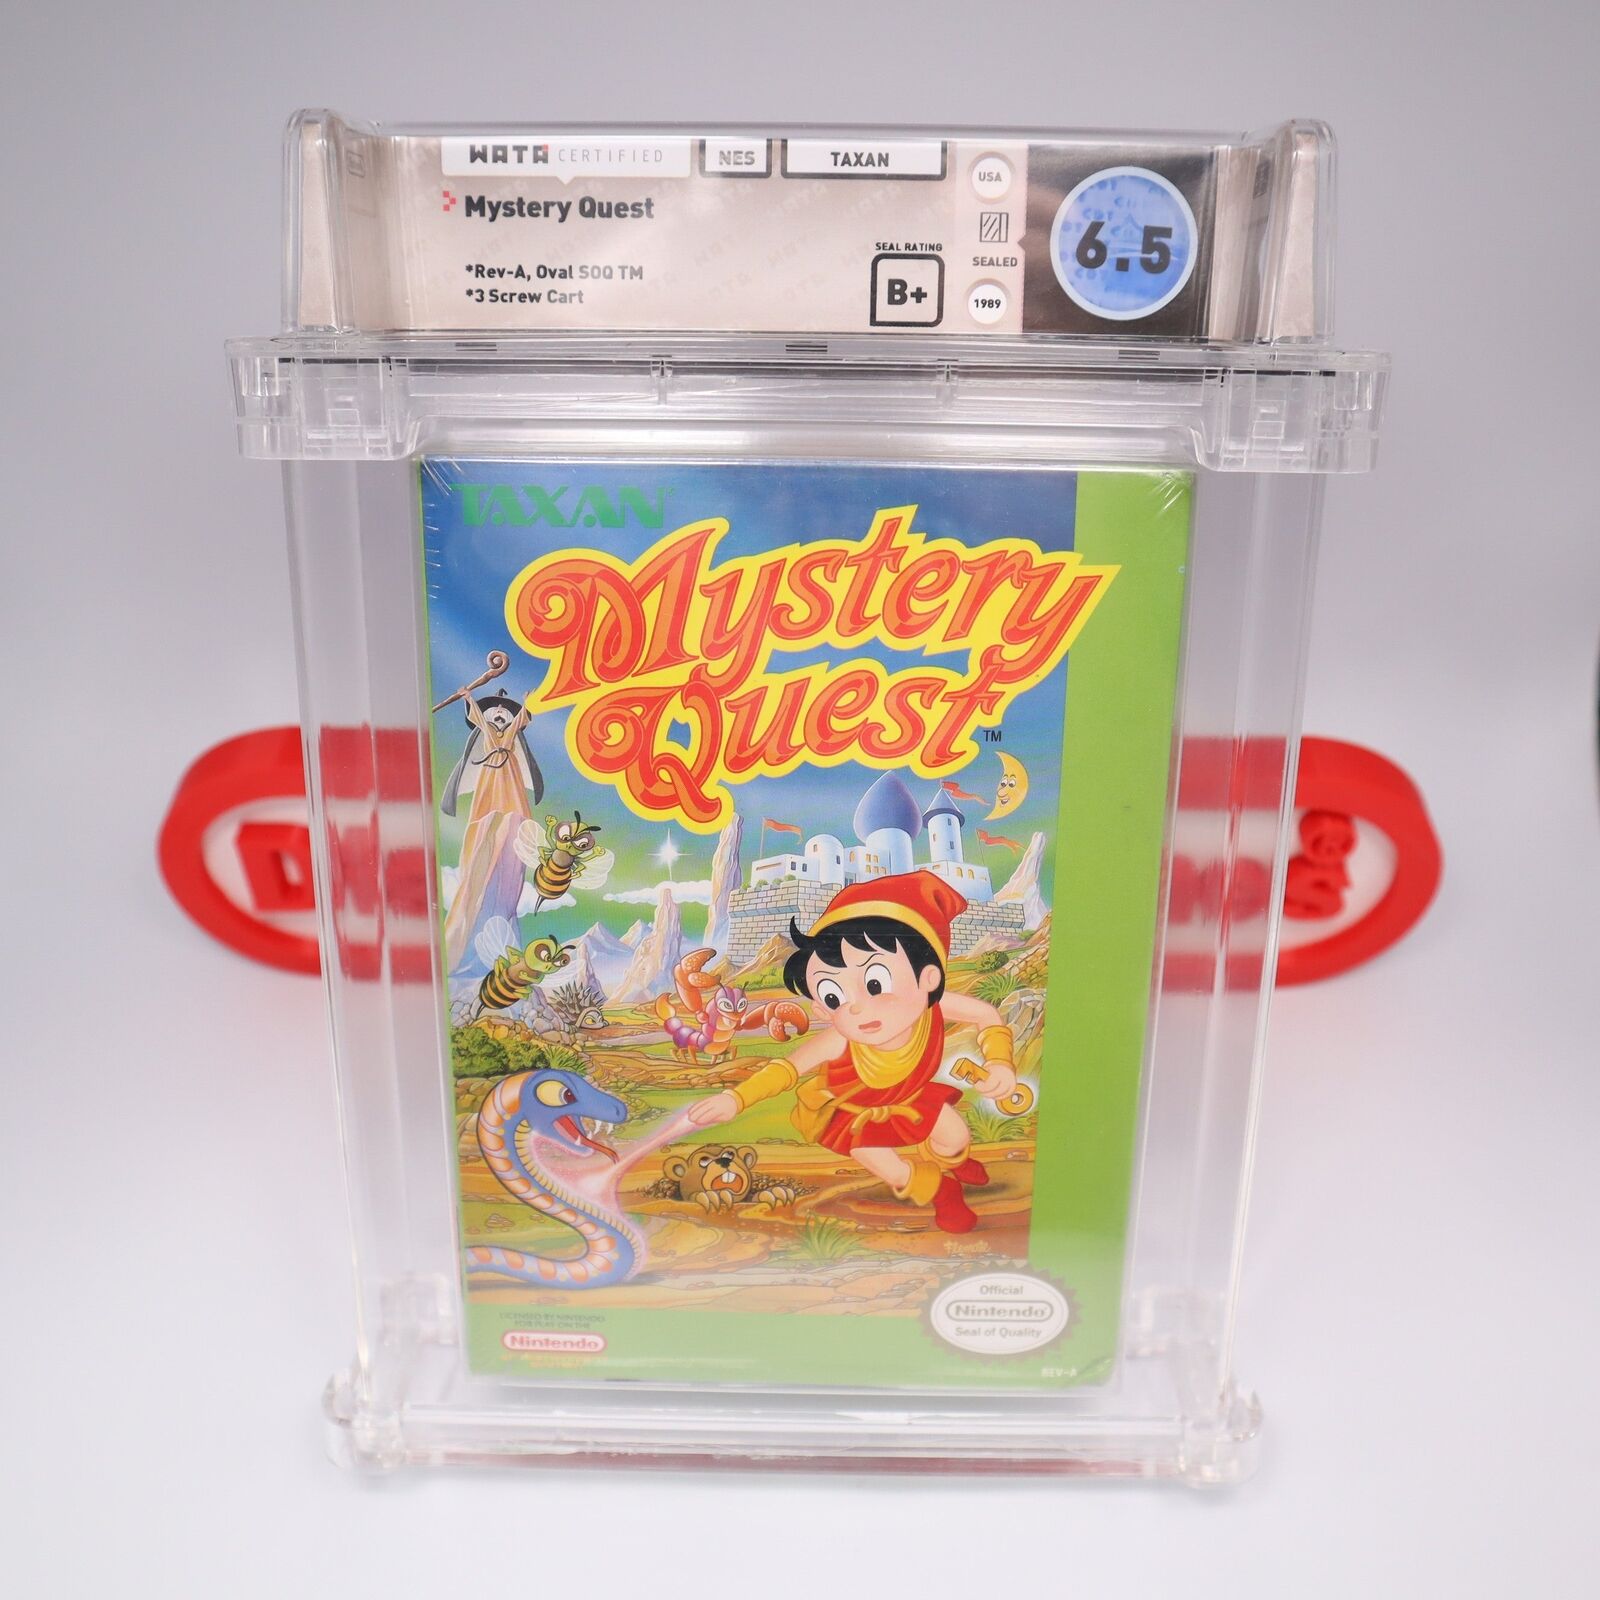 NES Nintendo Game MYSTERY QUEST - WATA GRADED 6.5 B+! NEW & Factory Sealed!